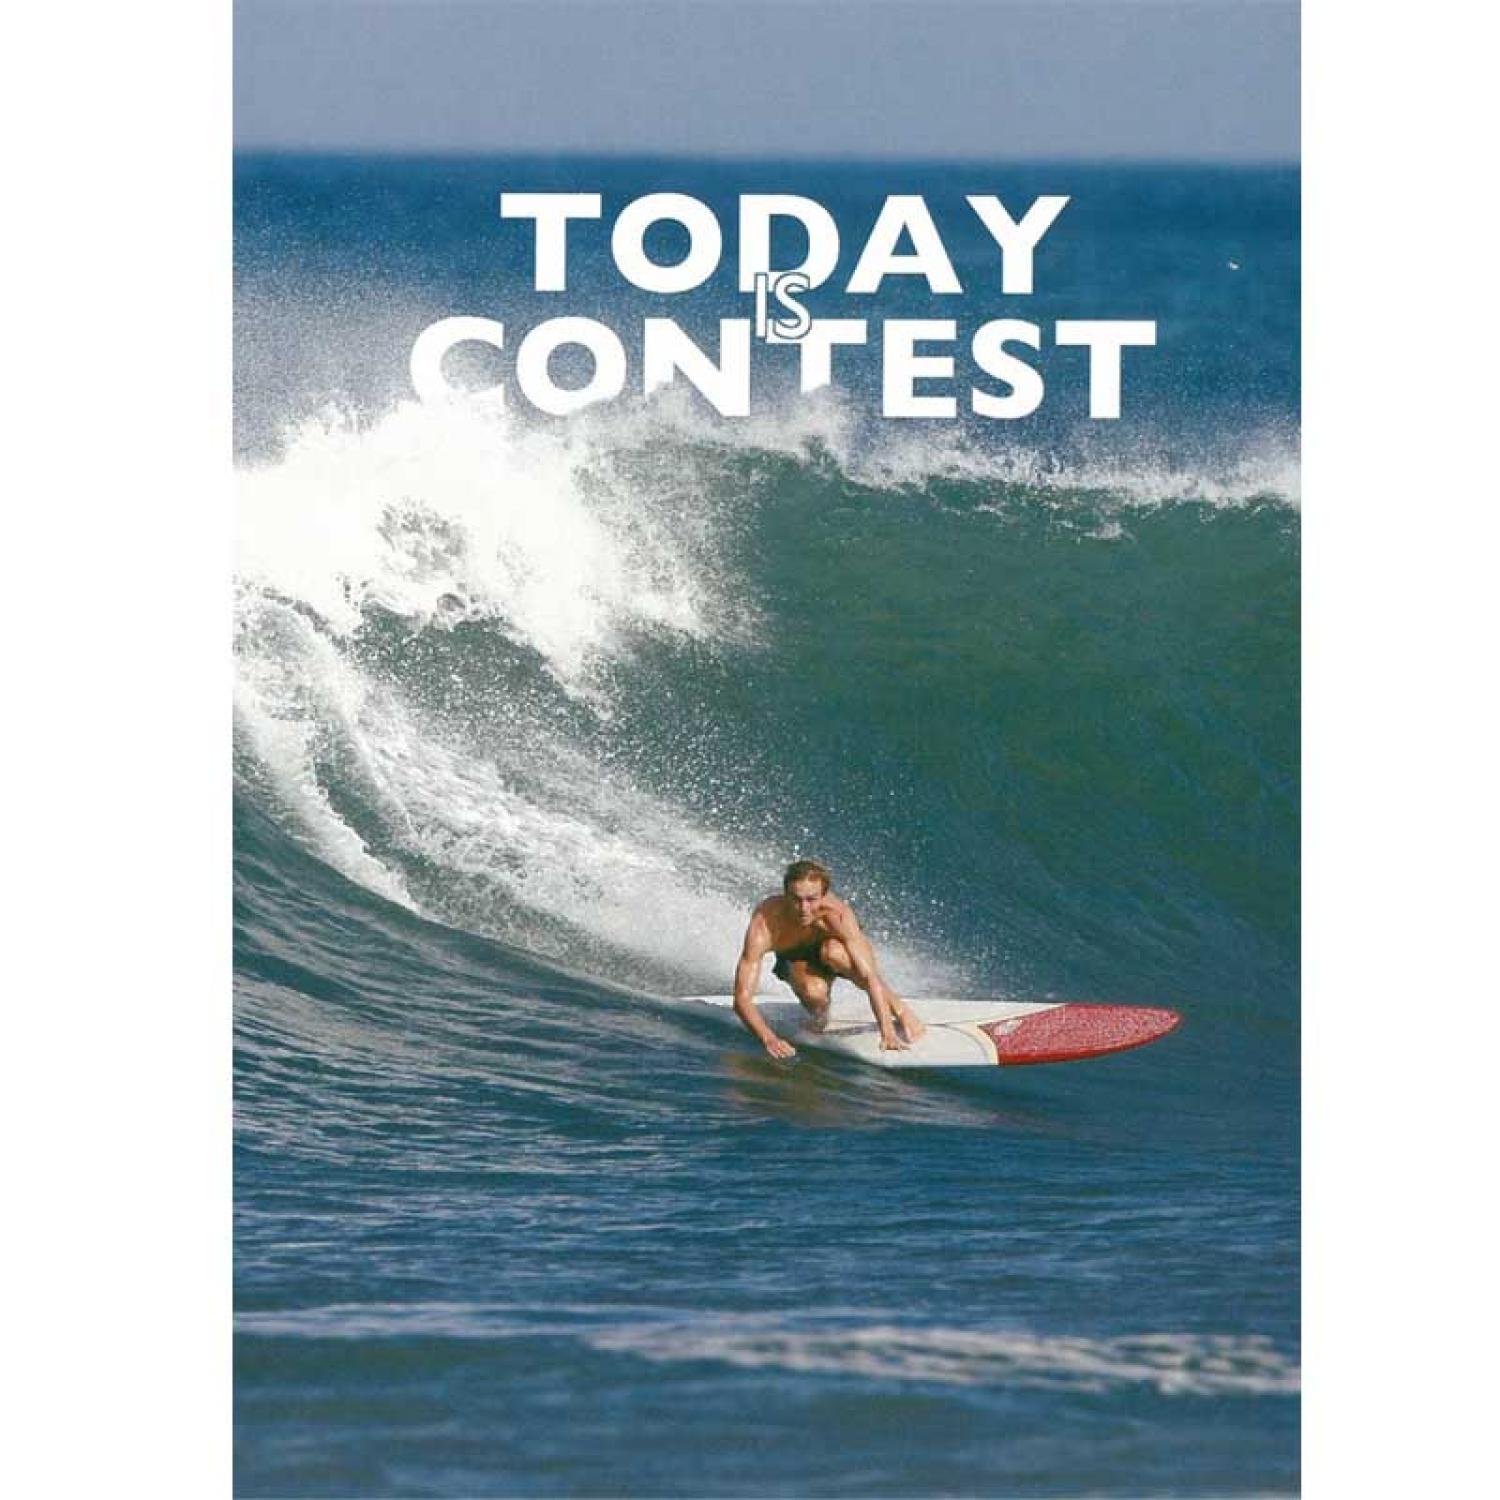 「TODAY IS CONTEST」好評販売中！